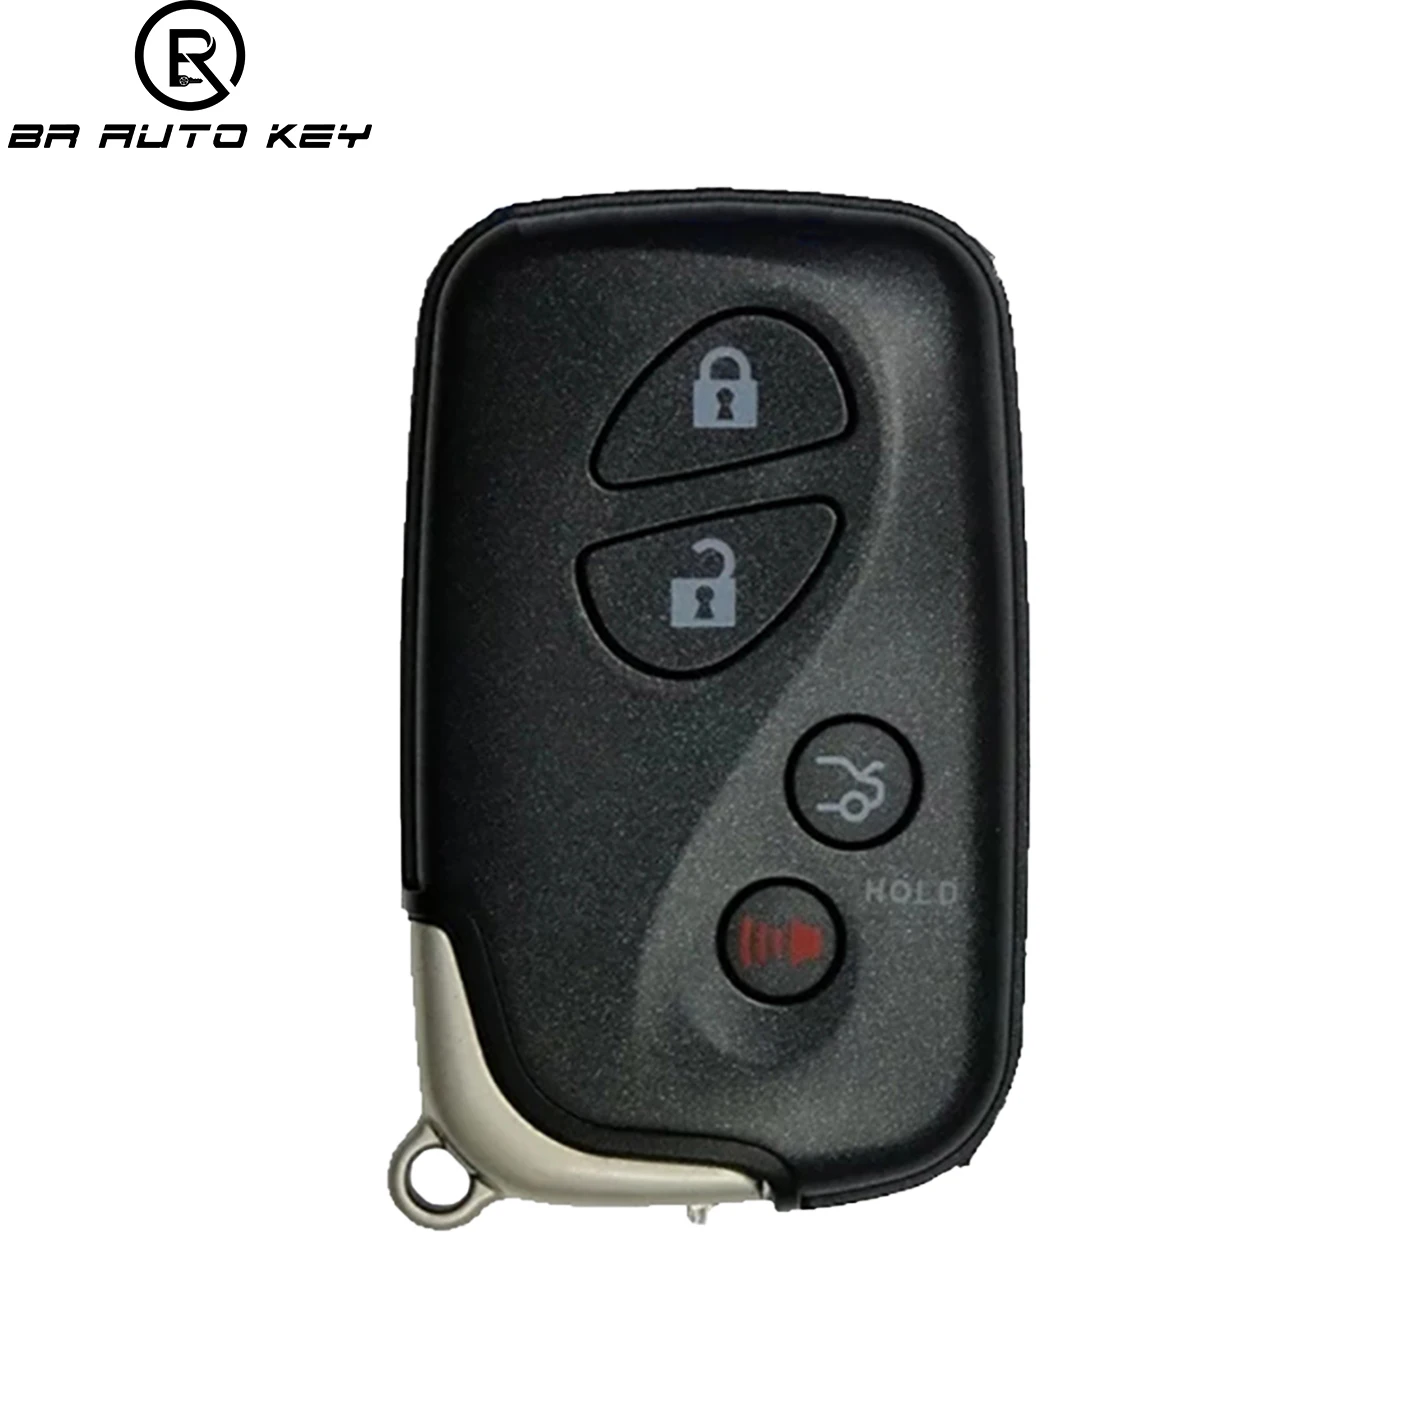 4 Buttons Smart Remote Car Key Fob For Lexus IS250 IS350 ES350 GS430 2006-2010 433MHZ With ID71 Chip HYQ14AAB 271451-0140